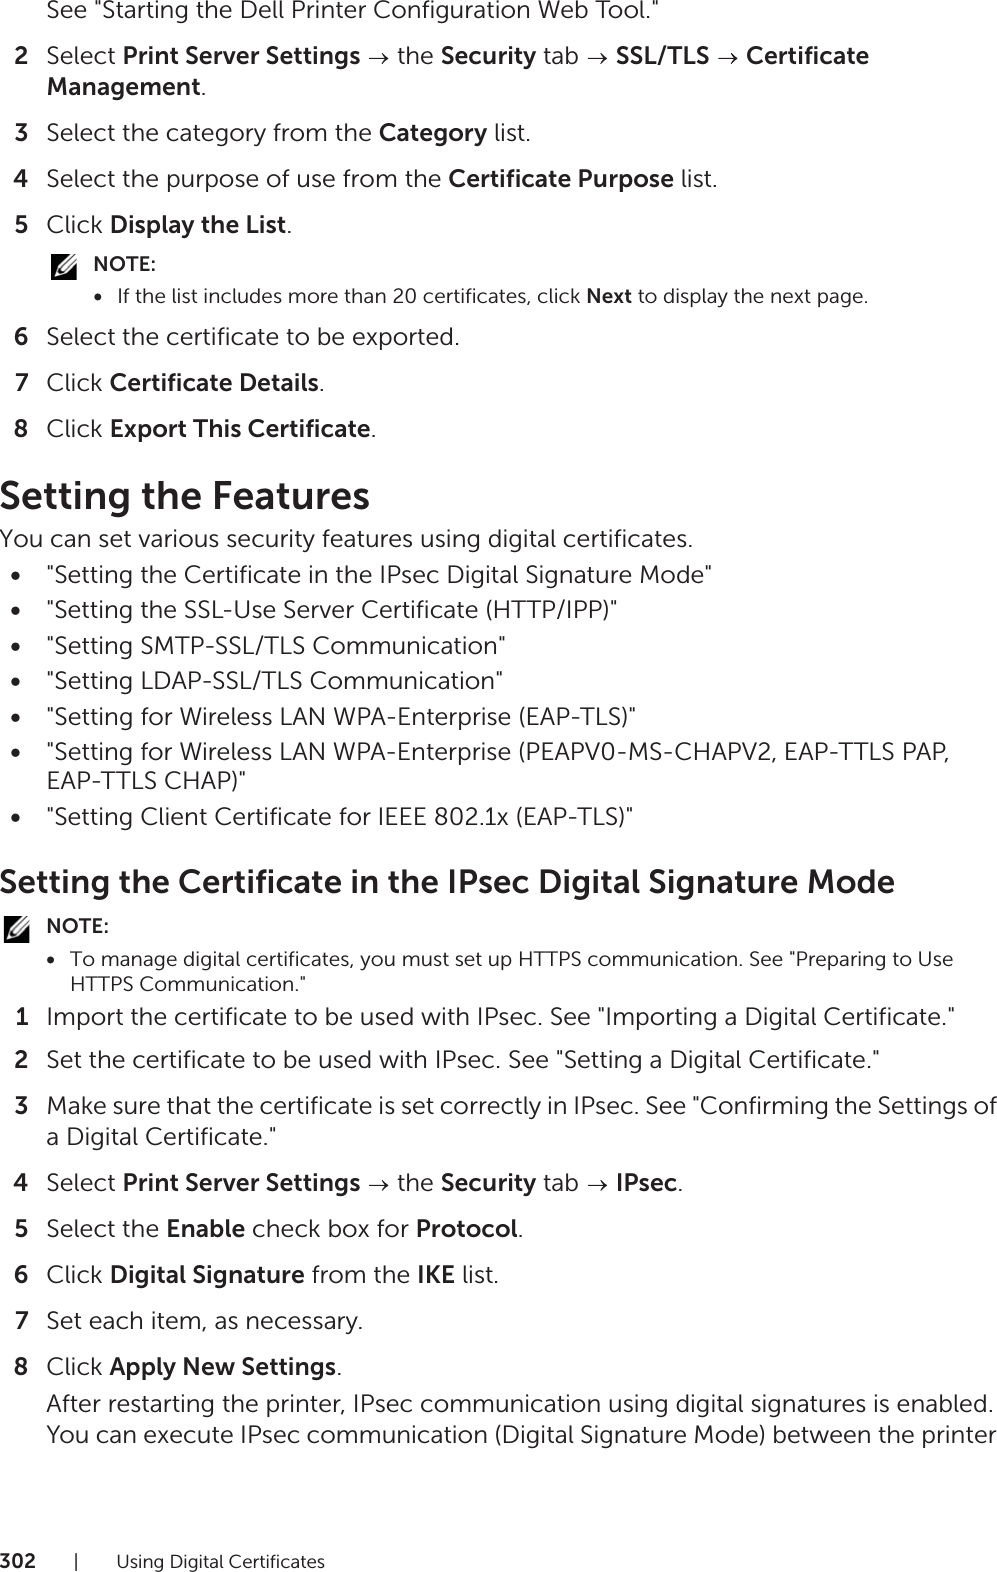 302| Using Digital CertificatesSee &quot;Starting the Dell Printer Configuration Web Tool.&quot;2Select Print Server Settings  the Security tab   SSL/TLS  Certificate Management.3Select the category from the Category list.4Select the purpose of use from the Certificate Purpose list.5Click Display the List.NOTE:•If the list includes more than 20 certificates, click Next to display the next page.6Select the certificate to be exported.7Click Certificate Details.8Click Export This Certificate.Setting the FeaturesYou can set various security features using digital certificates.•&quot;Setting the Certificate in the IPsec Digital Signature Mode&quot;•&quot;Setting the SSL-Use Server Certificate (HTTP/IPP)&quot;•&quot;Setting SMTP-SSL/TLS Communication&quot;•&quot;Setting LDAP-SSL/TLS Communication&quot;•&quot;Setting for Wireless LAN WPA-Enterprise (EAP-TLS)&quot;•&quot;Setting for Wireless LAN WPA-Enterprise (PEAPV0-MS-CHAPV2, EAP-TTLS PAP, EAP-TTLS CHAP)&quot;•&quot;Setting Client Certificate for IEEE 802.1x (EAP-TLS)&quot;Setting the Certificate in the IPsec Digital Signature ModeNOTE:•To manage digital certificates, you must set up HTTPS communication. See &quot;Preparing to Use HTTPS Communication.&quot;1Import the certificate to be used with IPsec. See &quot;Importing a Digital Certificate.&quot;2Set the certificate to be used with IPsec. See &quot;Setting a Digital Certificate.&quot;3Make sure that the certificate is set correctly in IPsec. See &quot;Confirming the Settings of a Digital Certificate.&quot;4Select Print Server Settings  the Security tab   IPsec.5Select the Enable check box for Protocol.6Click Digital Signature from the IKE list.7Set each item, as necessary.8Click Apply New Settings.After restarting the printer, IPsec communication using digital signatures is enabled. You can execute IPsec communication (Digital Signature Mode) between the printer 